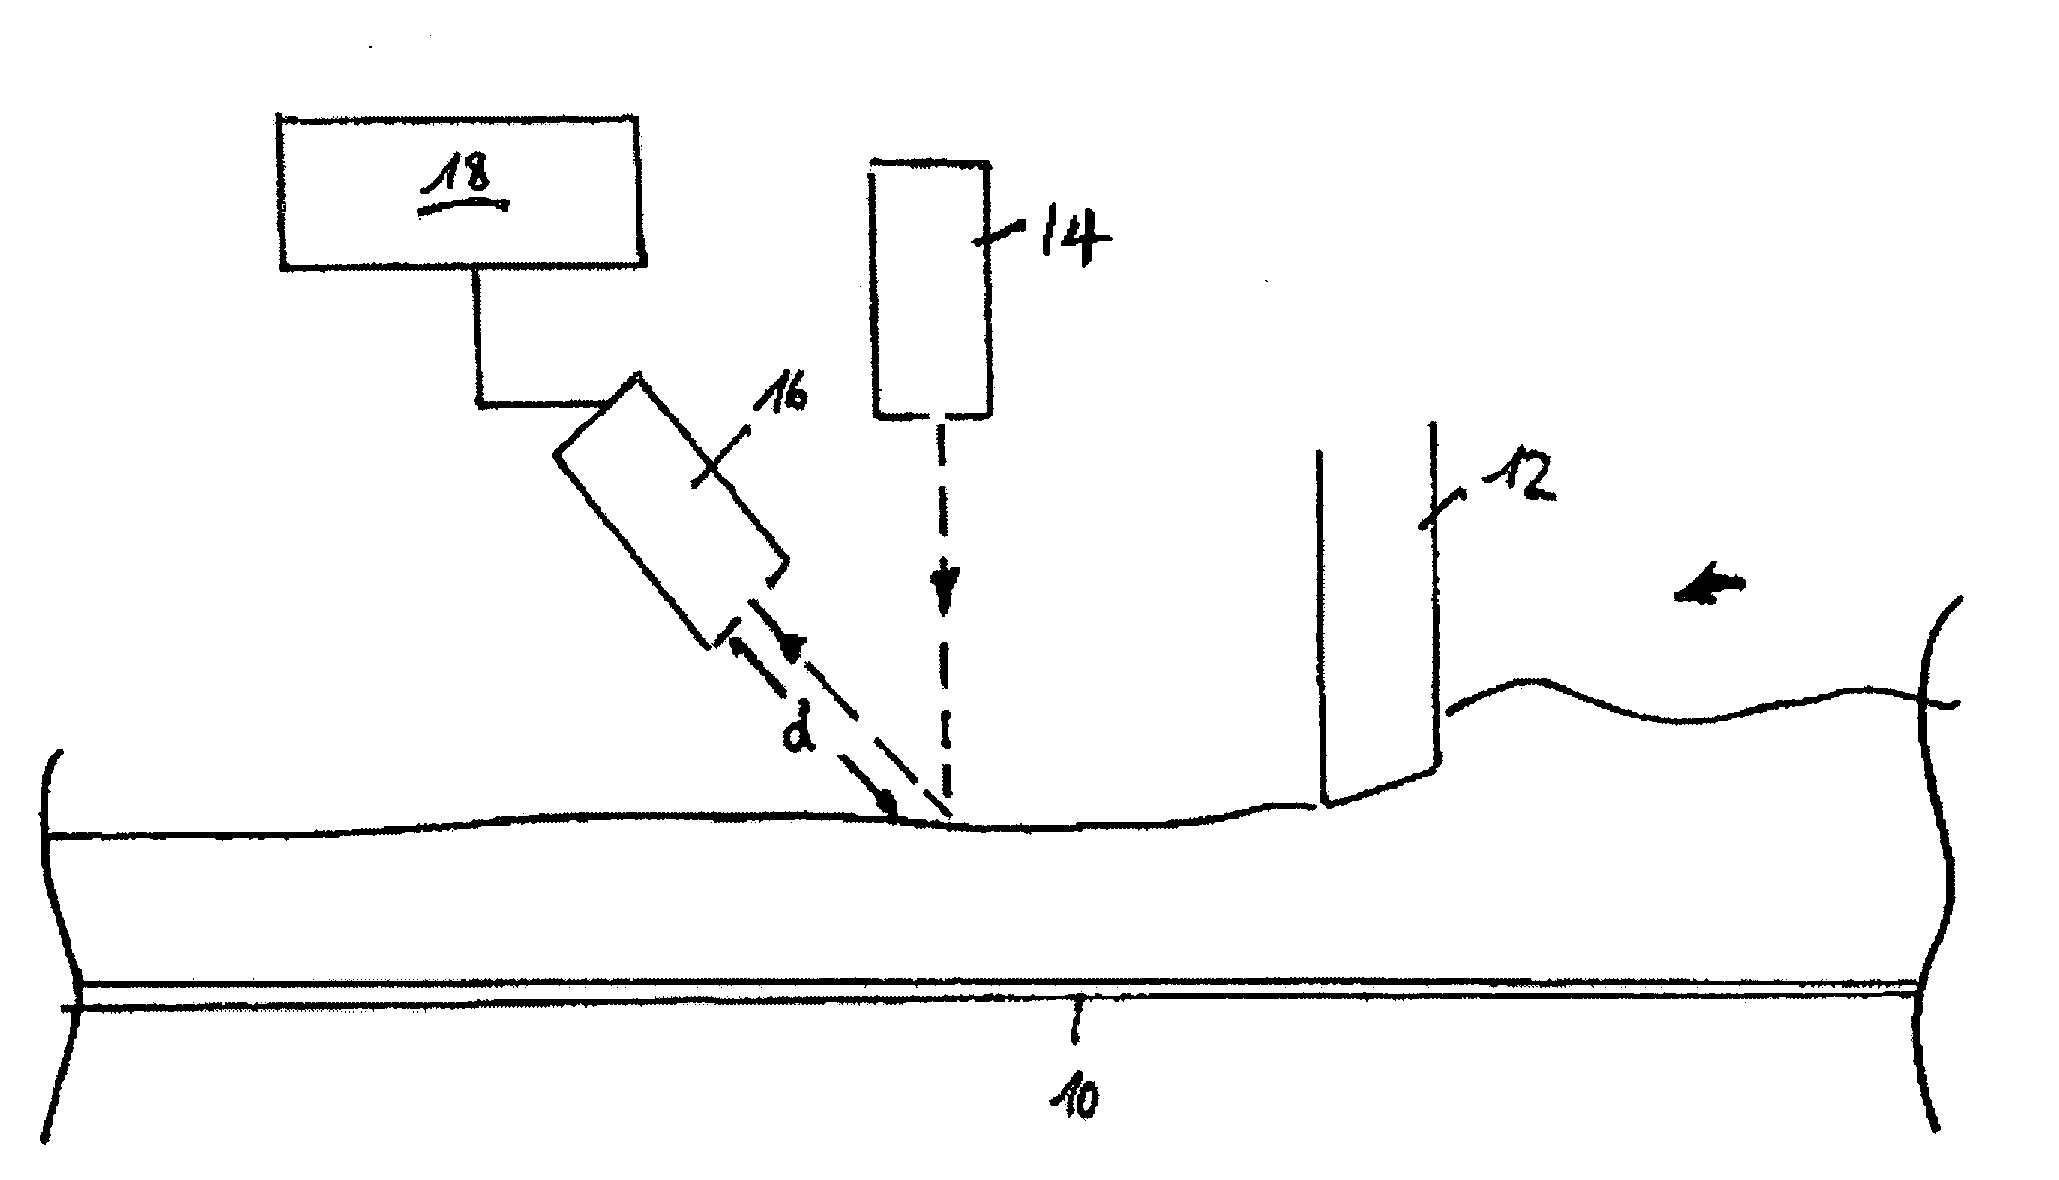 Process and device for the fast or on-line determination of the components of a two-component or multi-component system